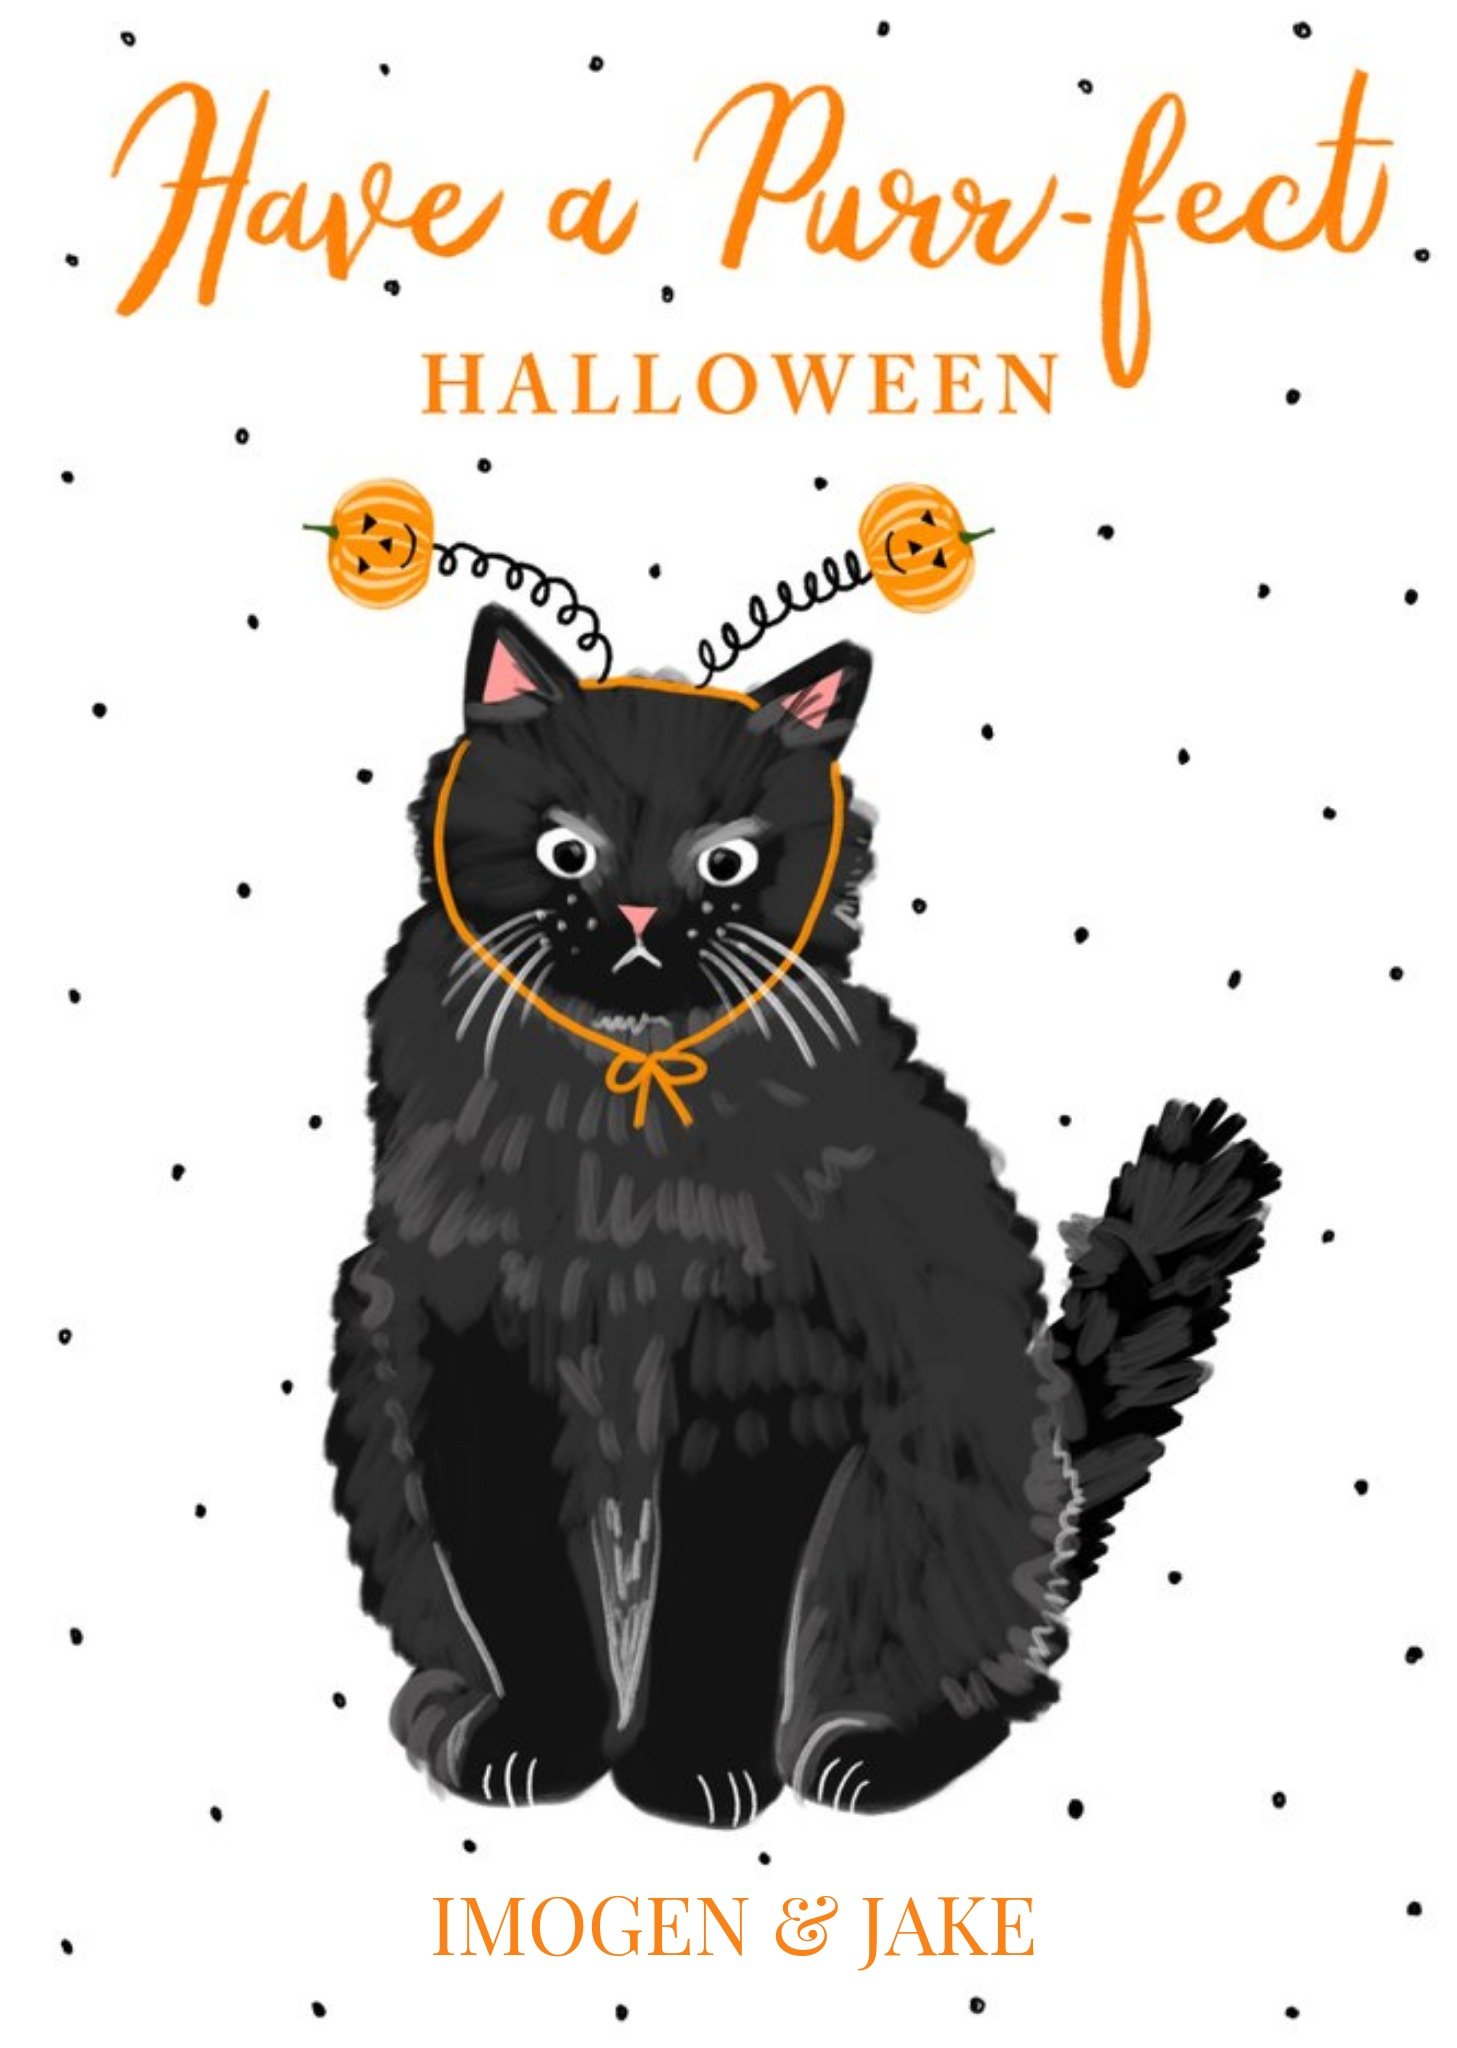 Okey Dokey Design Boo To You Purr-Fect Halloween Card, Large